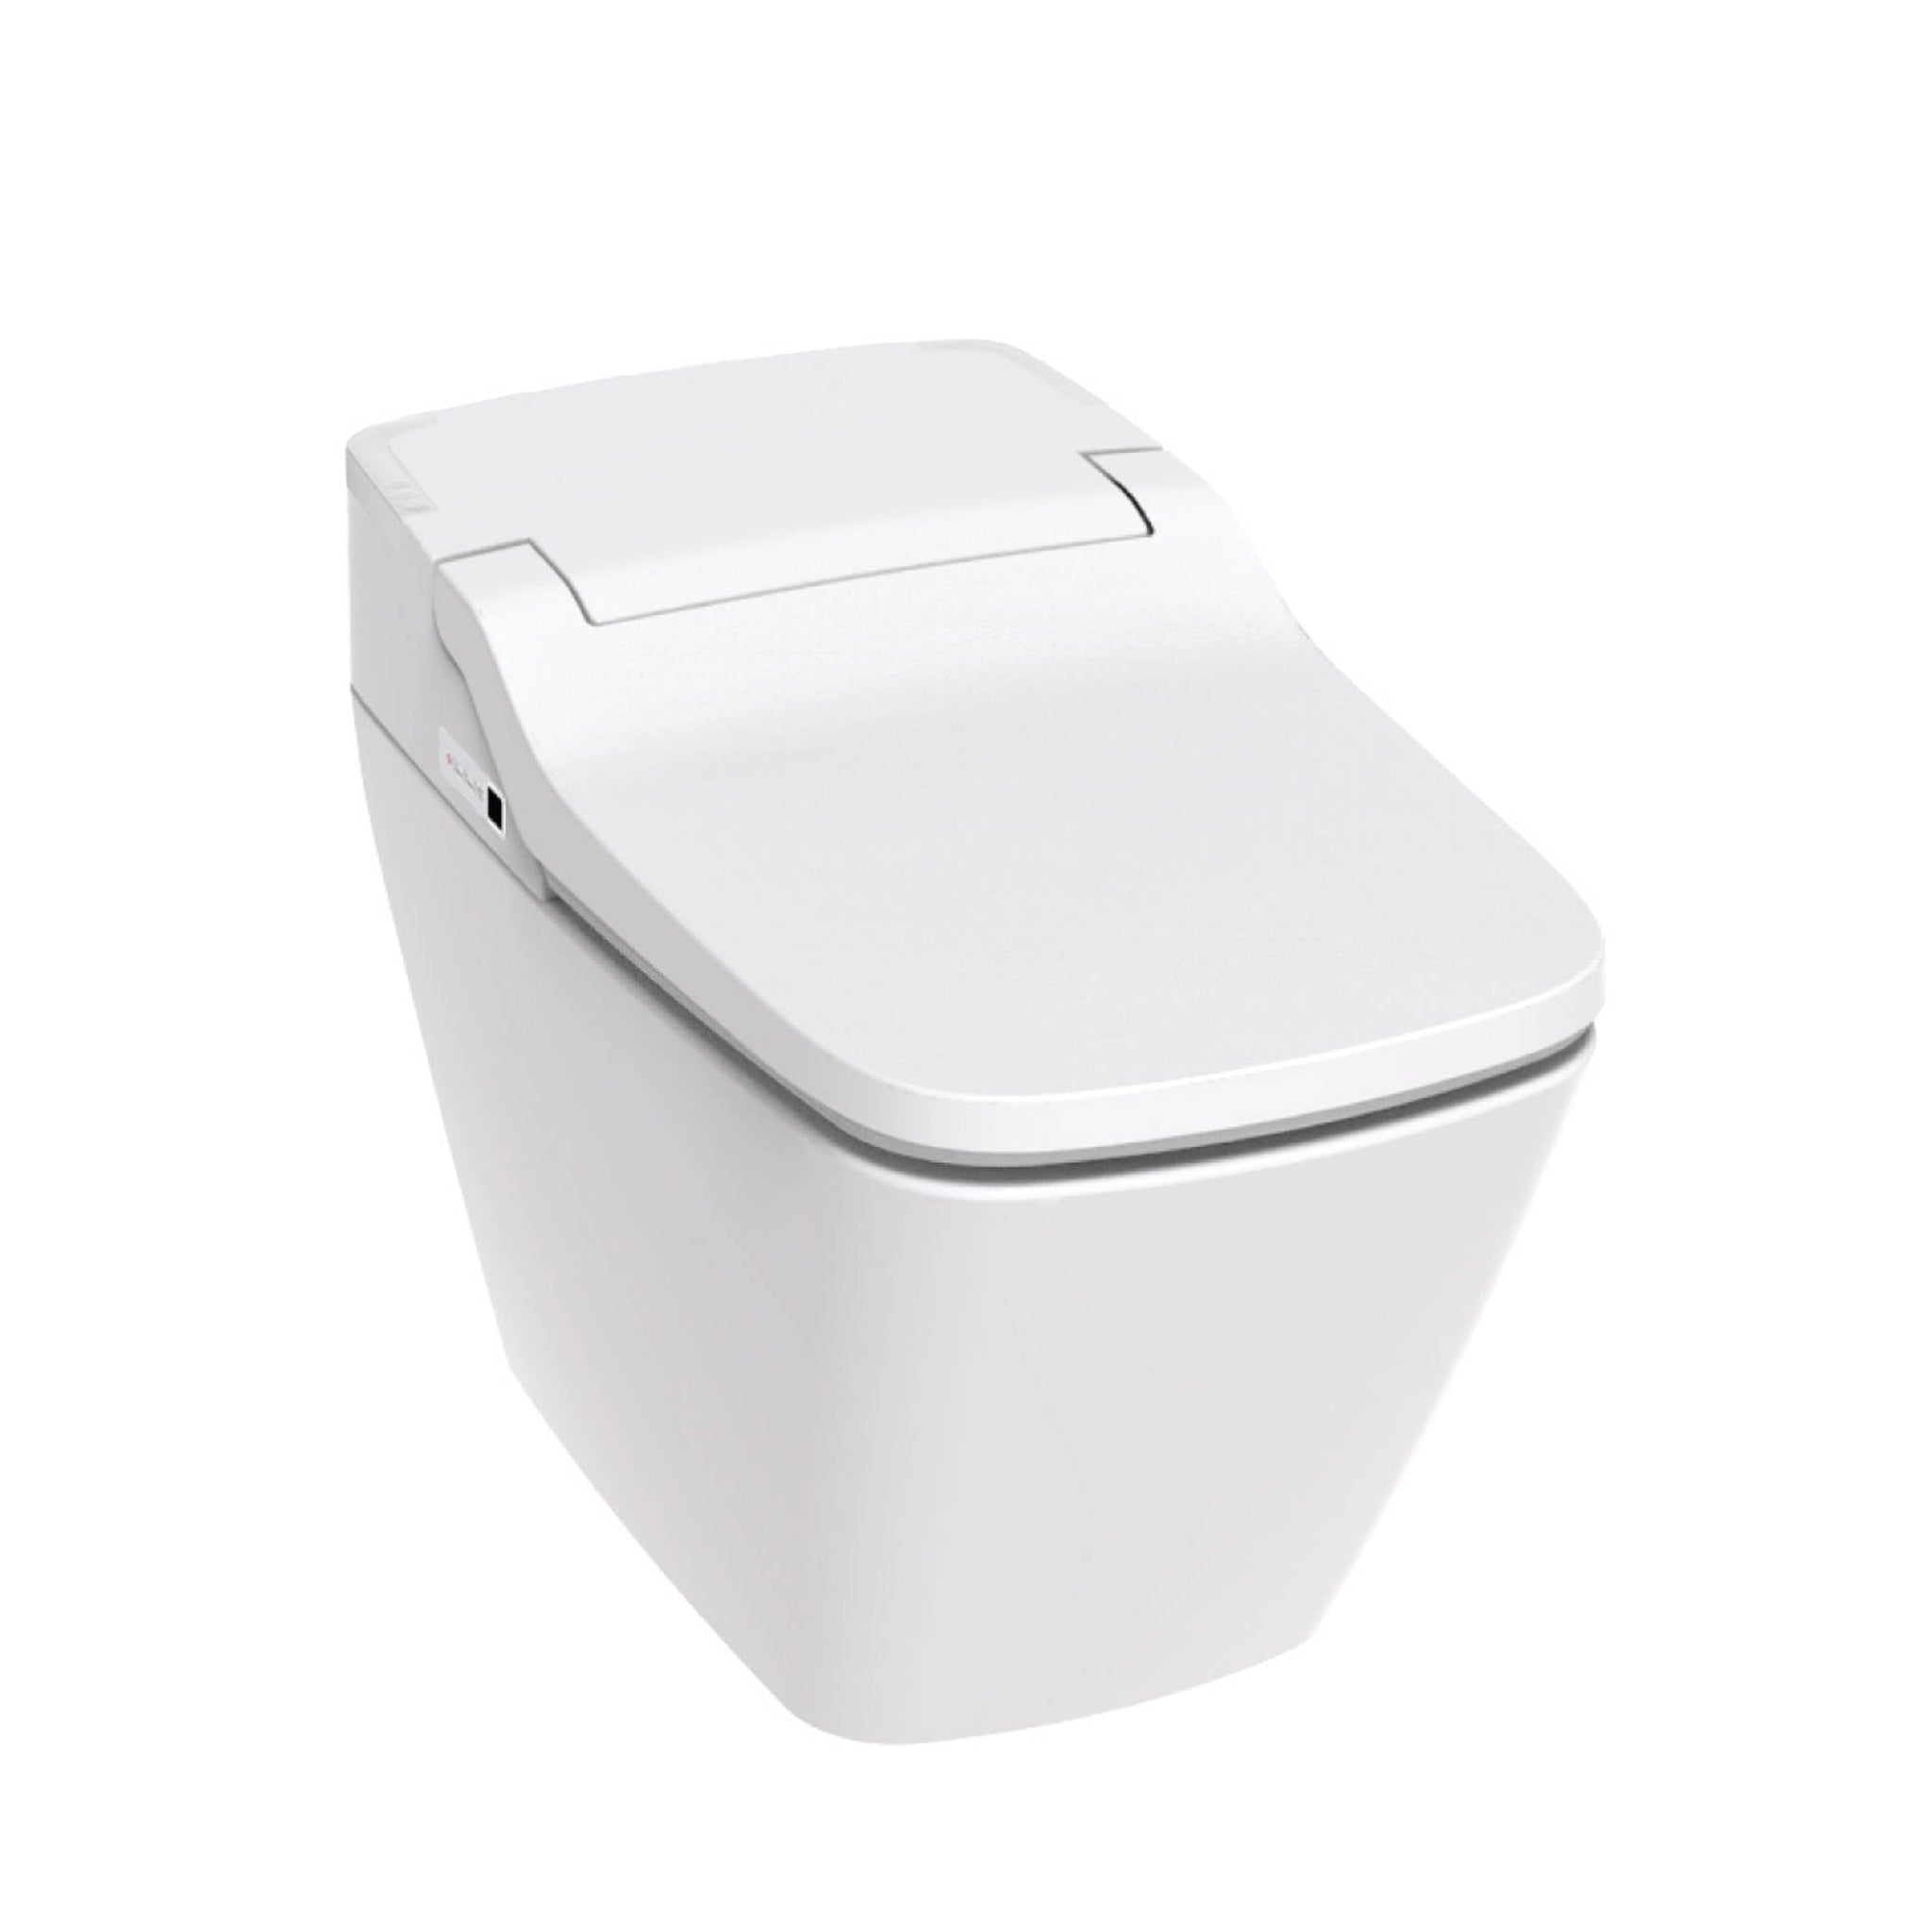 VOVO, VOVO Stylement TC-090W One-piece Smart Digital Toilet with Auto Dual Flush, Heated Seat and Wireless Remote Control